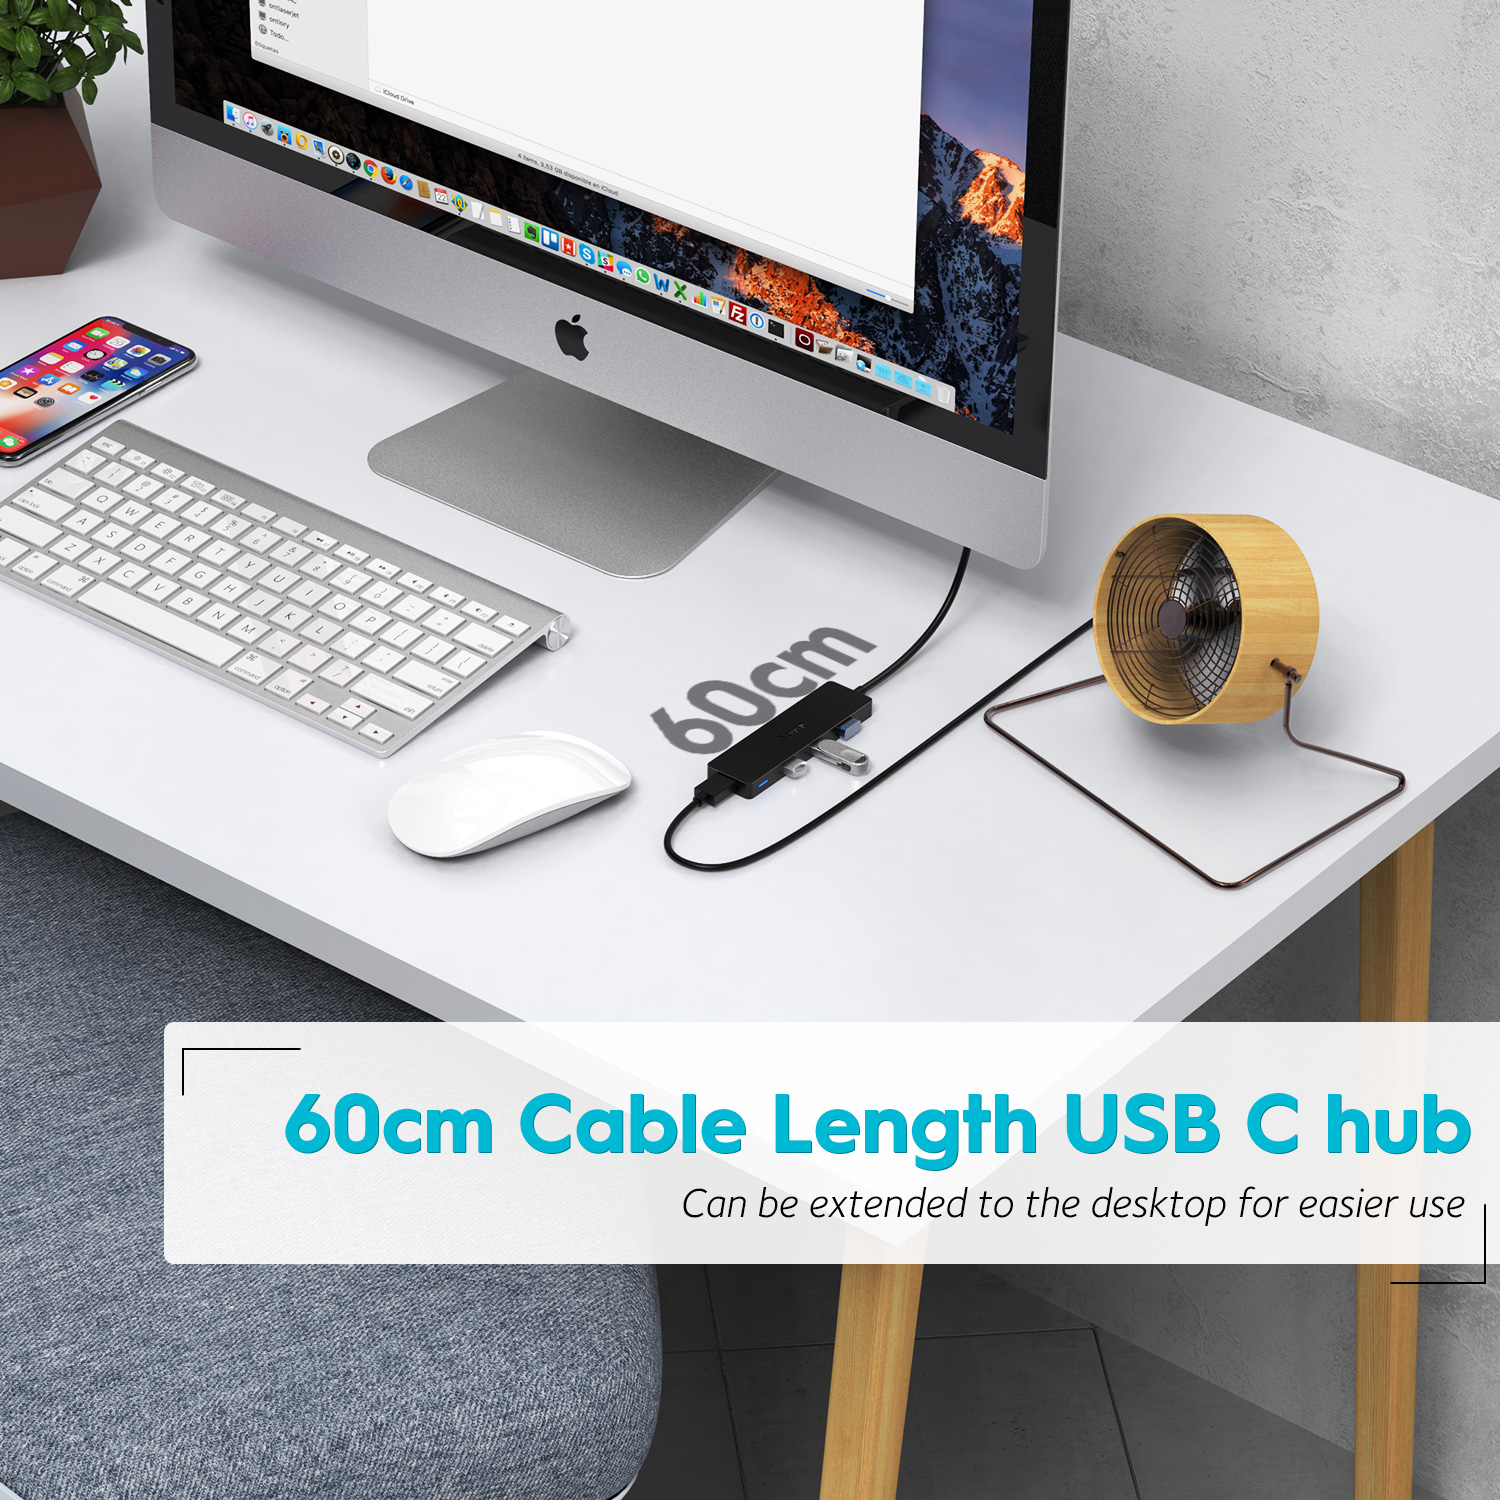 03-90309 Aceele USB C to USB 3.0 Hub with 2ft Long Cable Cord, Ultra Slim USBC 3.1 Thunderbolt 3 to 4 USB Ports Adapter for MacBook Pro, iMac, Samsung Galaxy S20 S10 S9 S8 Note 10, Chromebook, Type C 